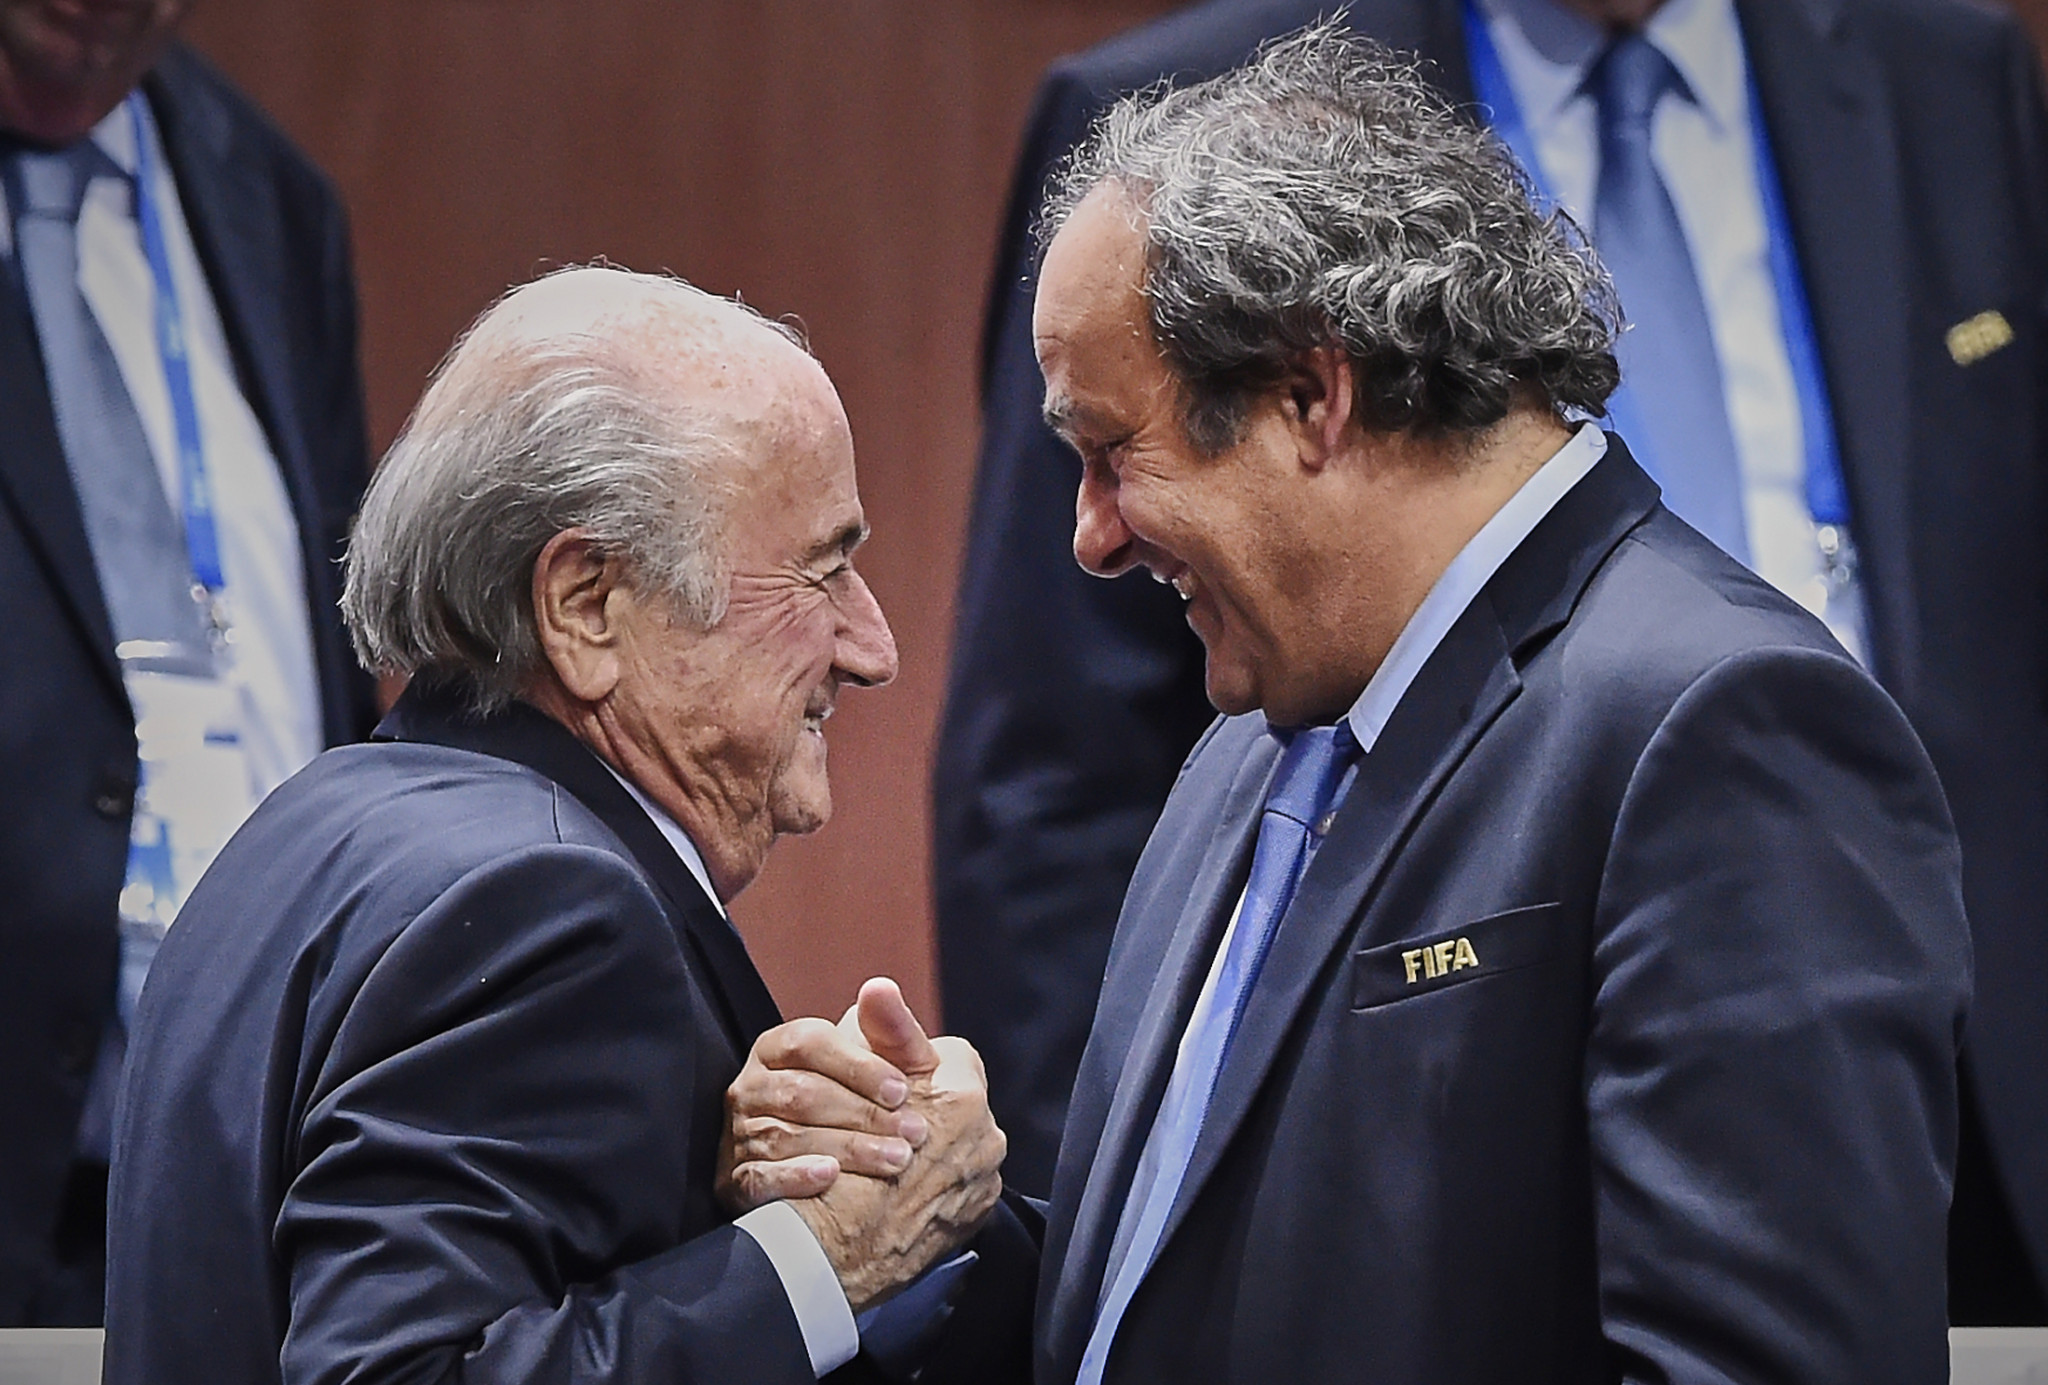 Russia to welcome Blatter and Platini to 2018 FIFA World Cup